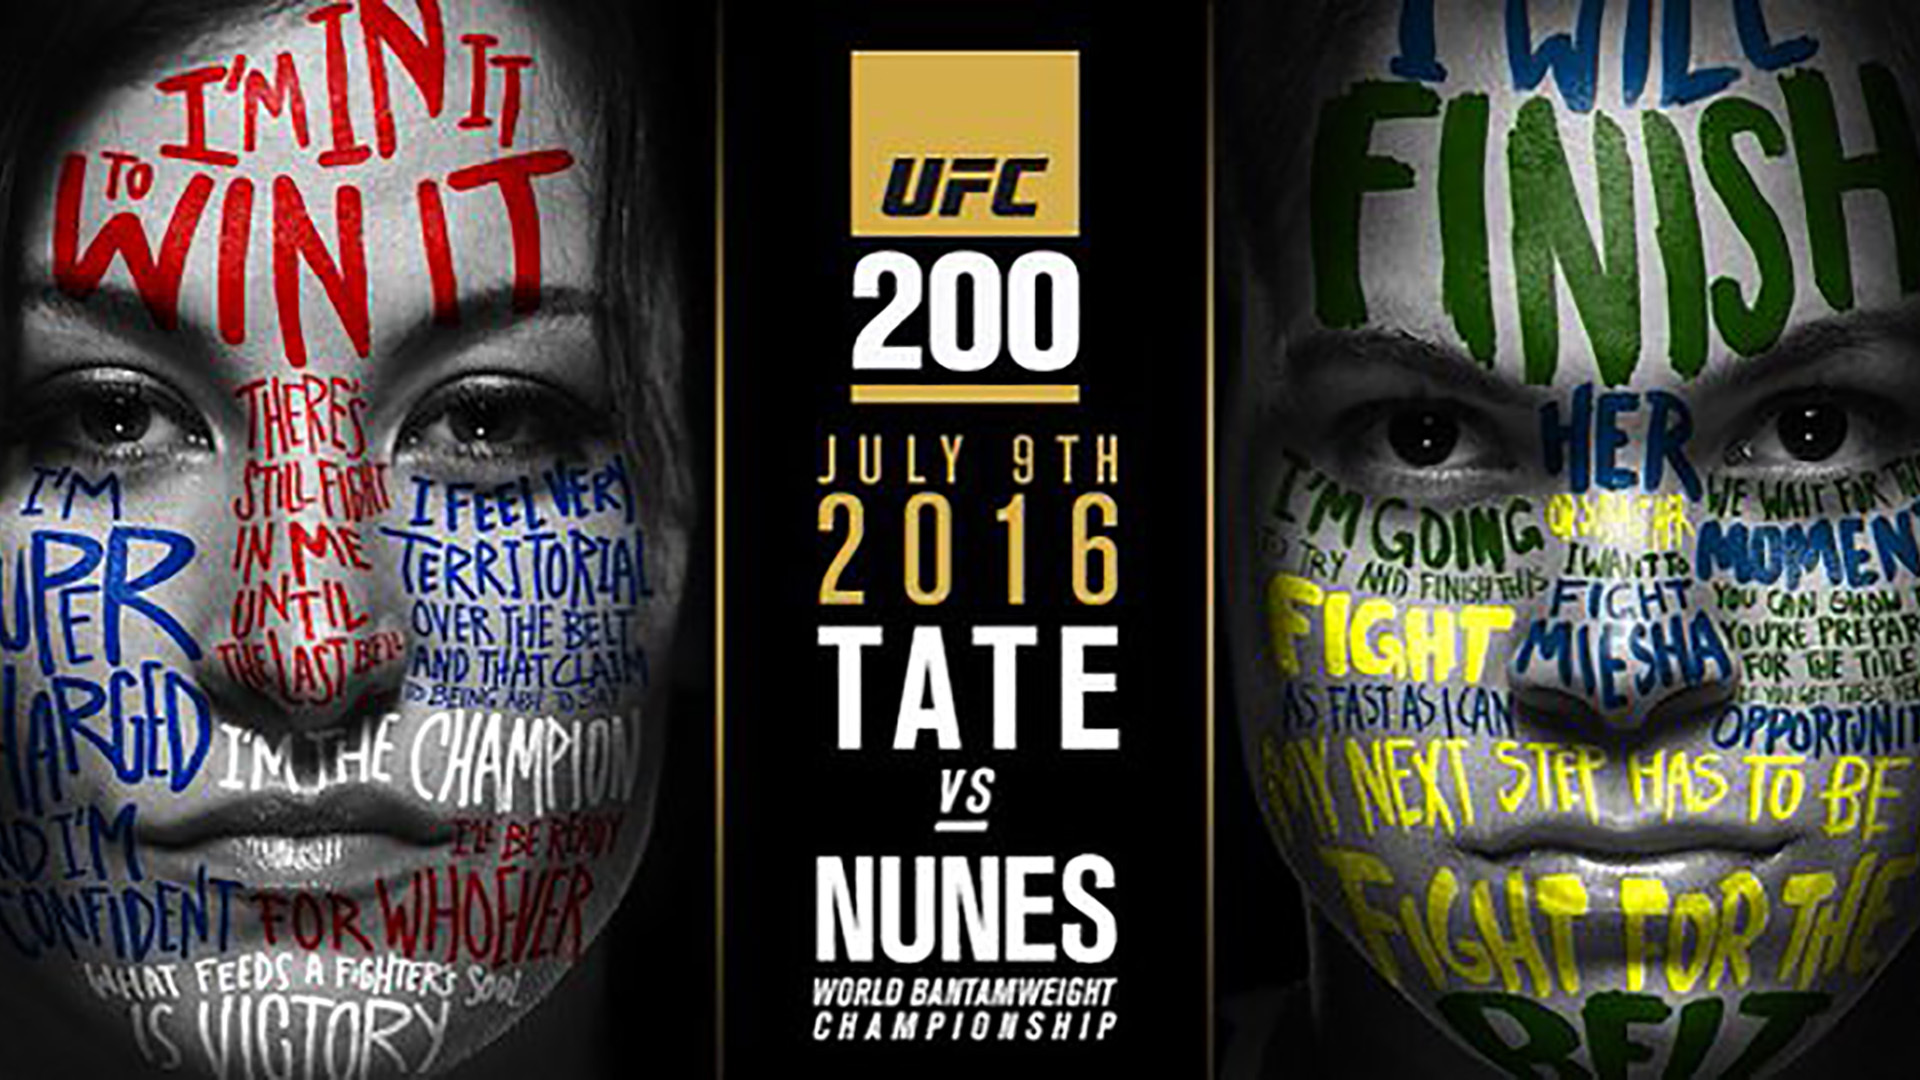 WR161 – UFC 200 – Four Film Freaks Watching Fights Part II